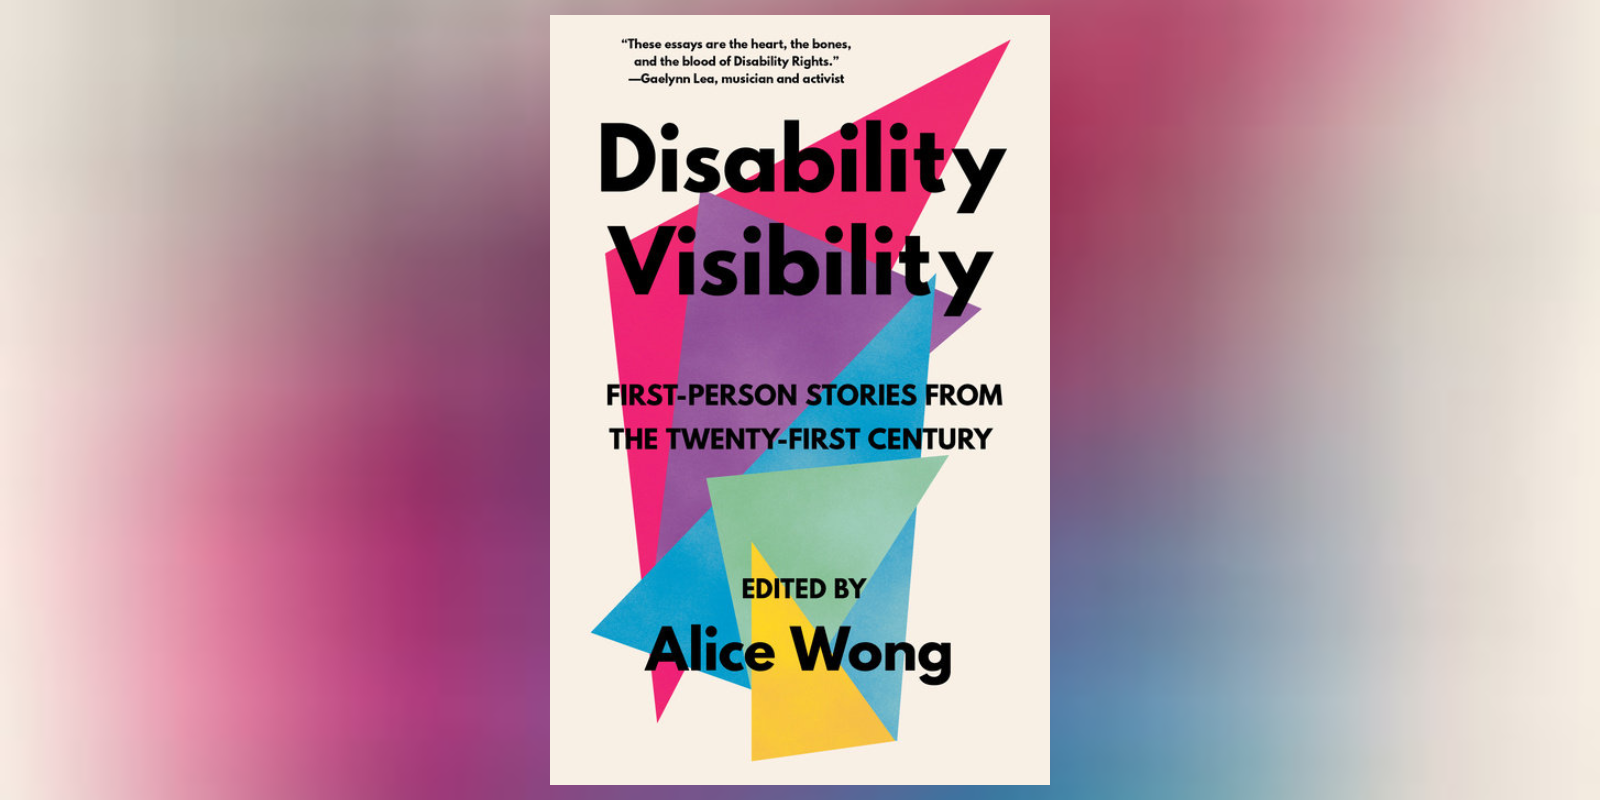 DISABILITY VISIBILITY is an urgent collection of contemporary essays by disabled people.